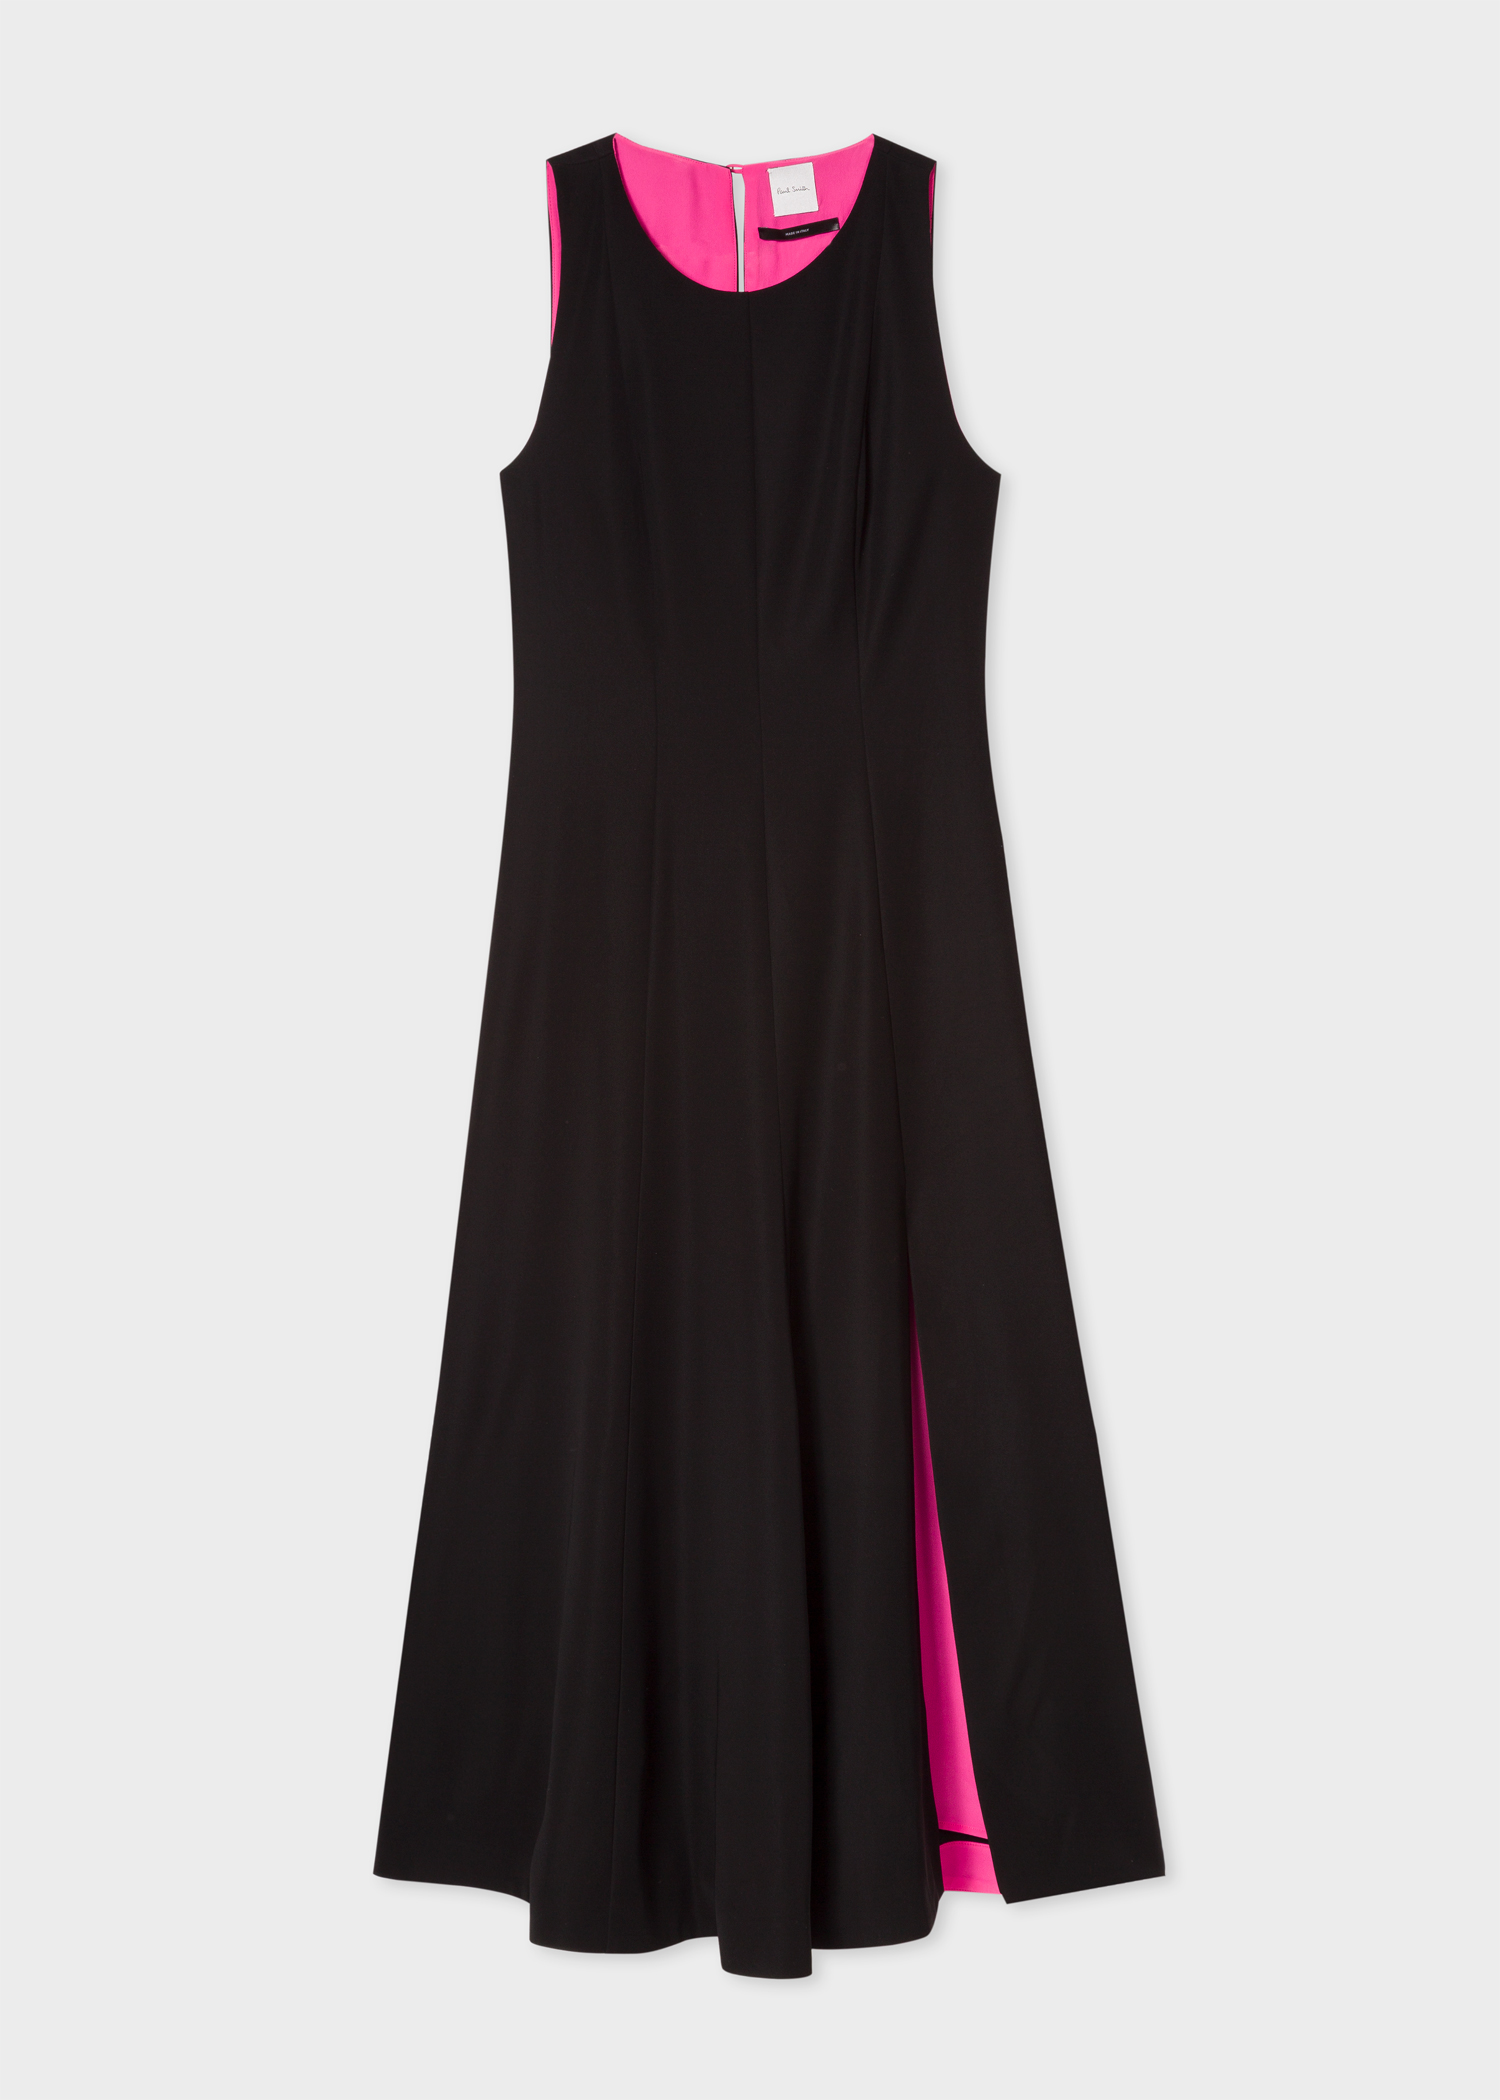 Front view - Women's Black Sleeveless Silk-Blend Maxi Dress With Front Split Paul Smith